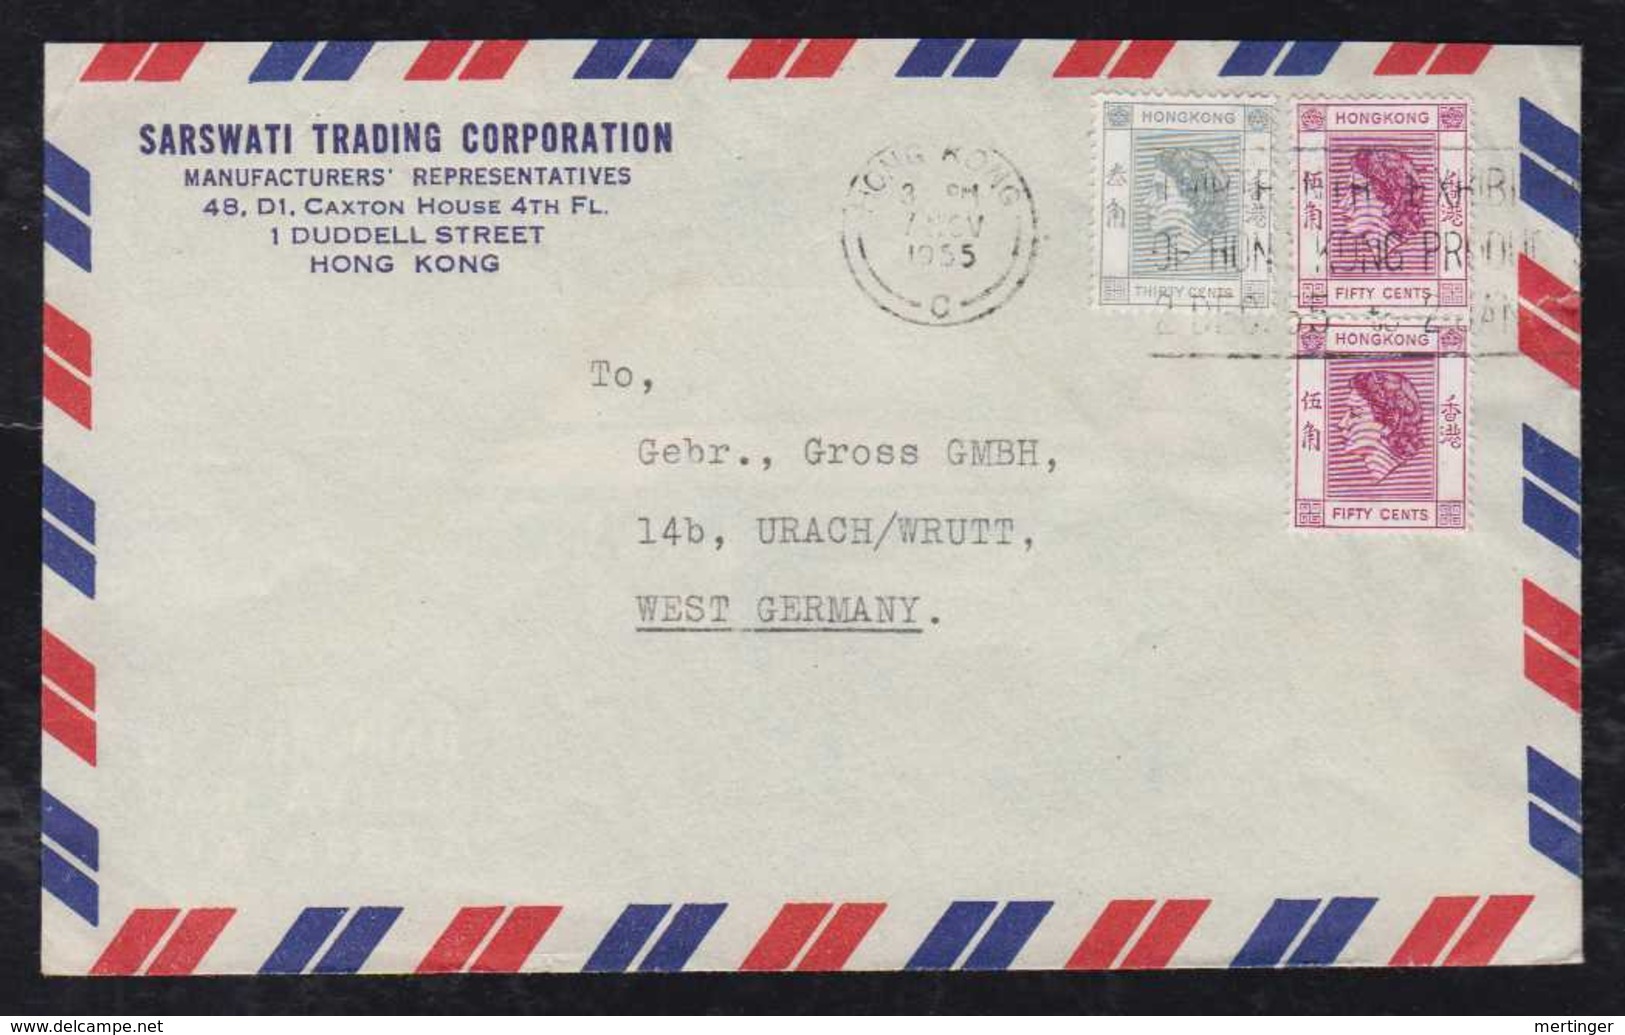 China Hong Kong 1955 AIRMAIL Cover To URACH Germany - Covers & Documents